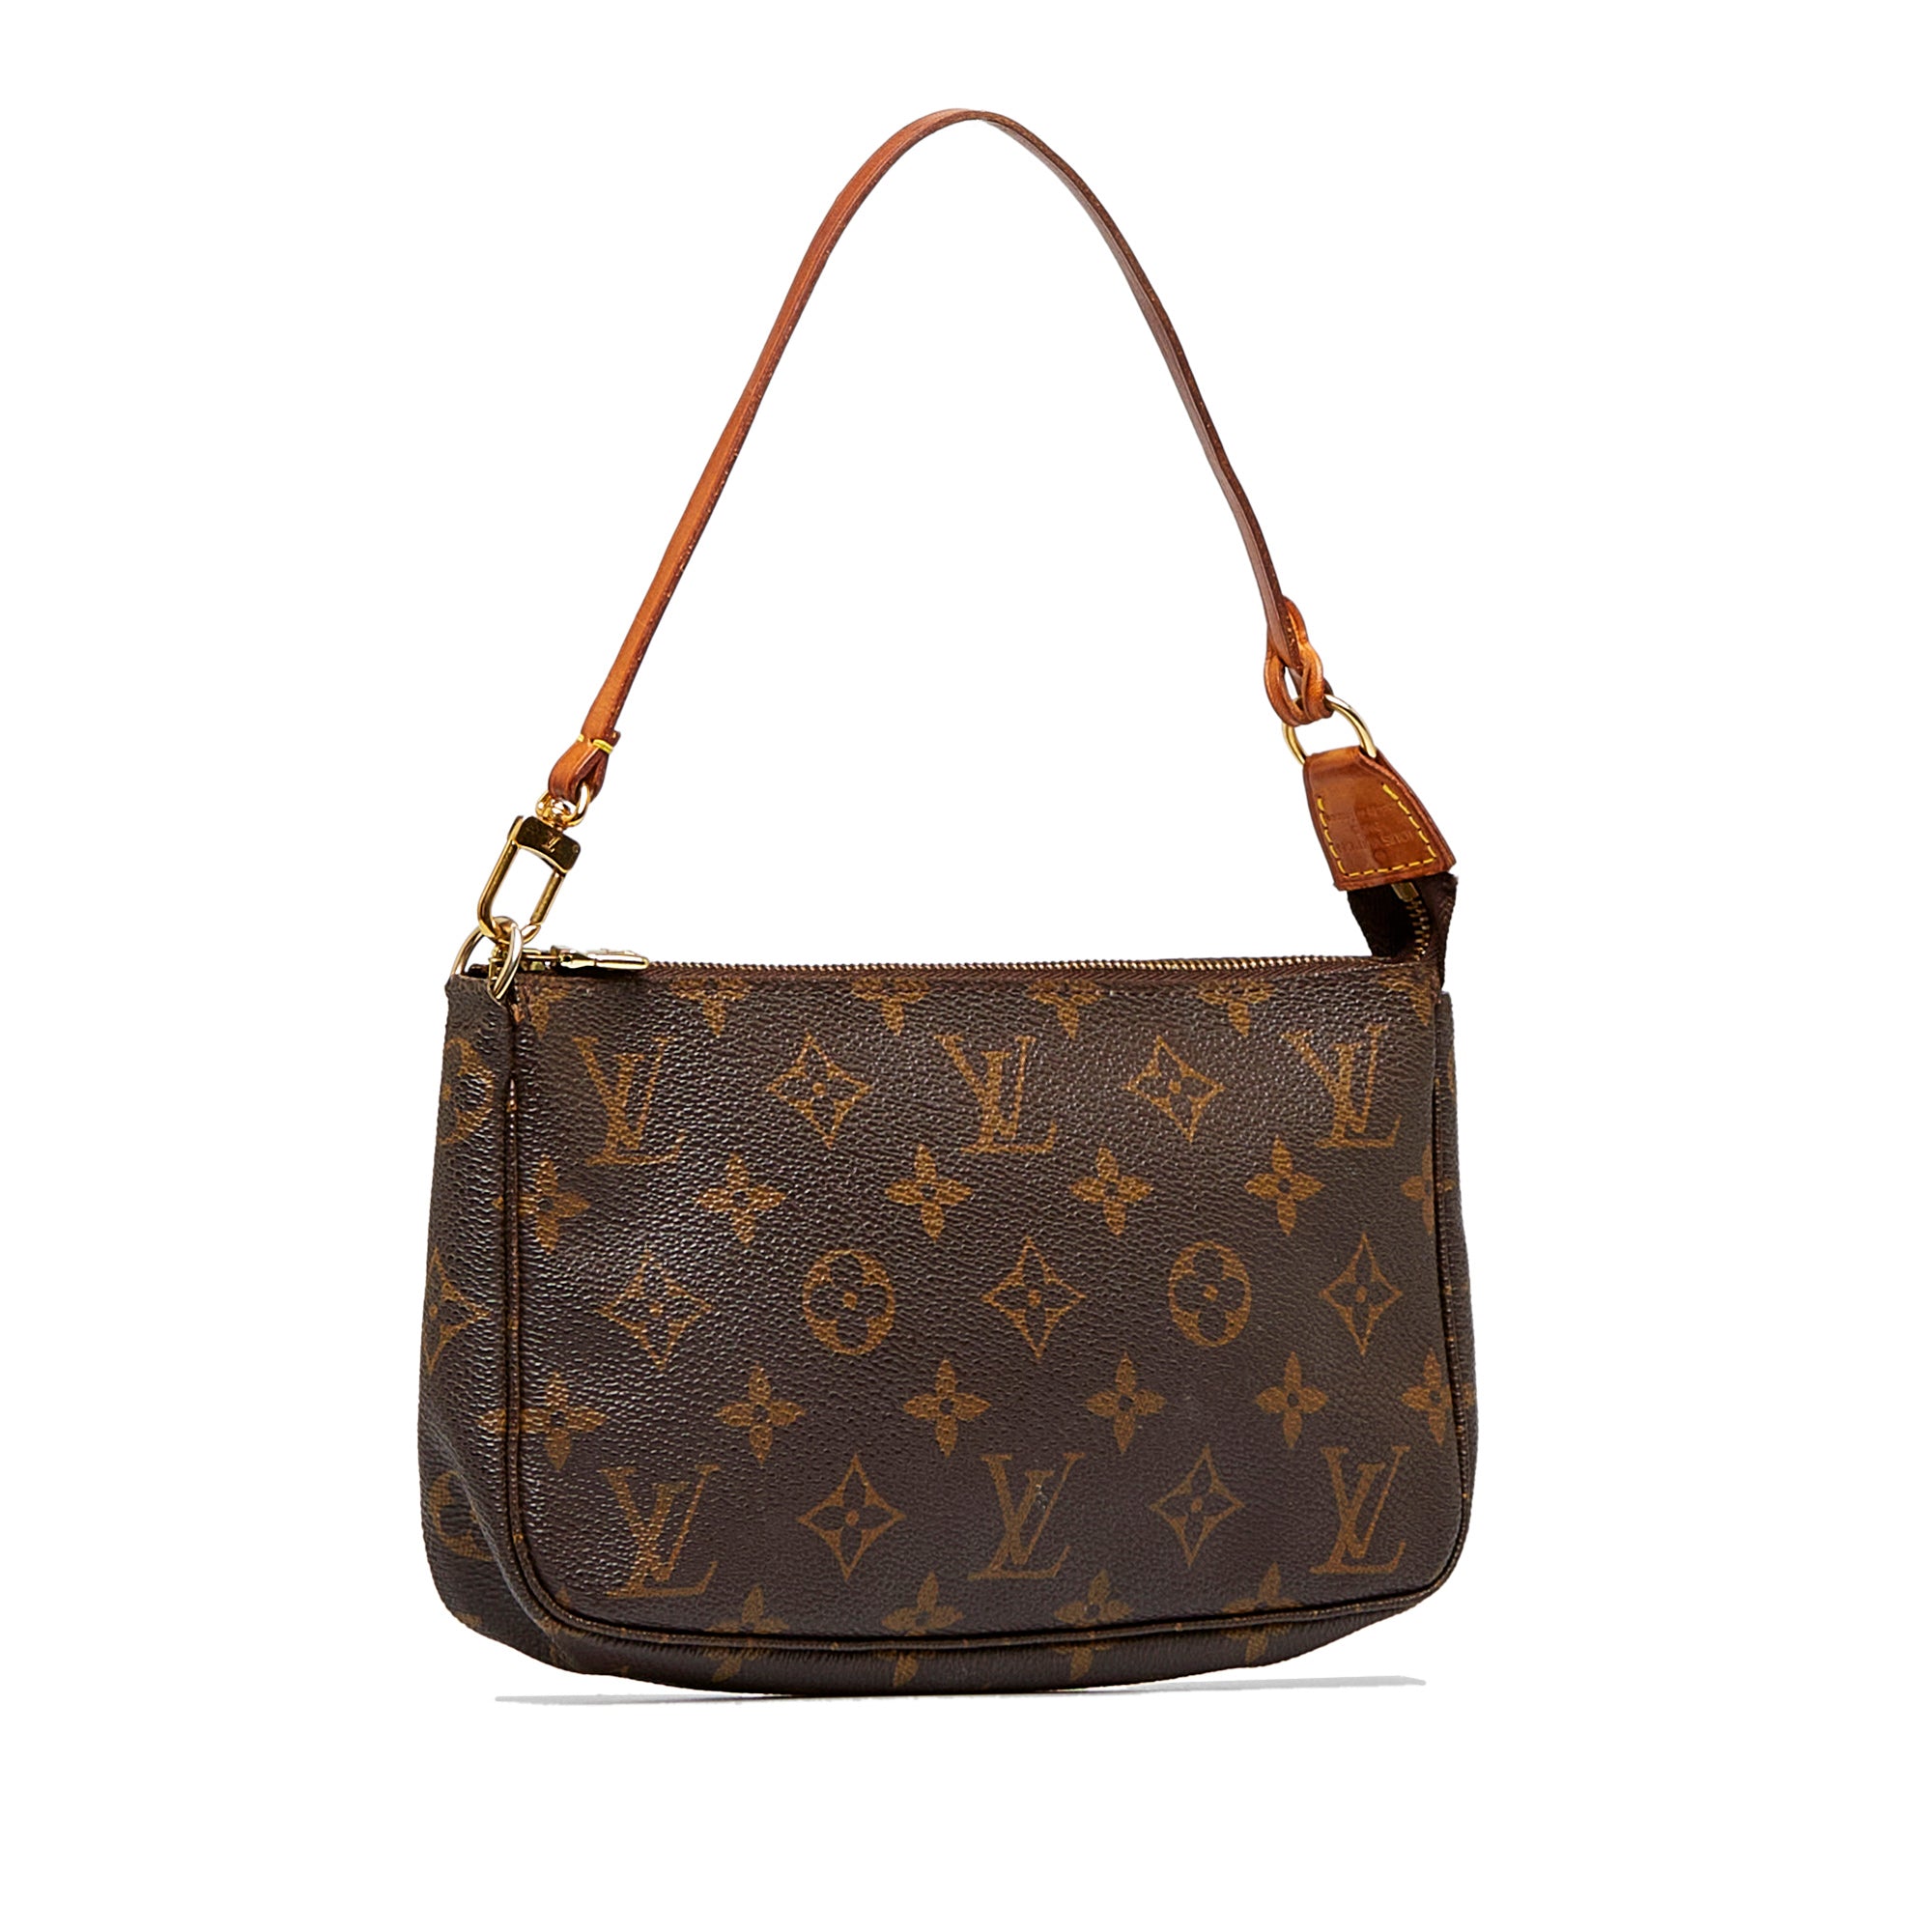 Louis Vuitton - Authenticated Pochette Accessoire Travel Bag - Cloth Brown for Women, Never Worn, with Tag